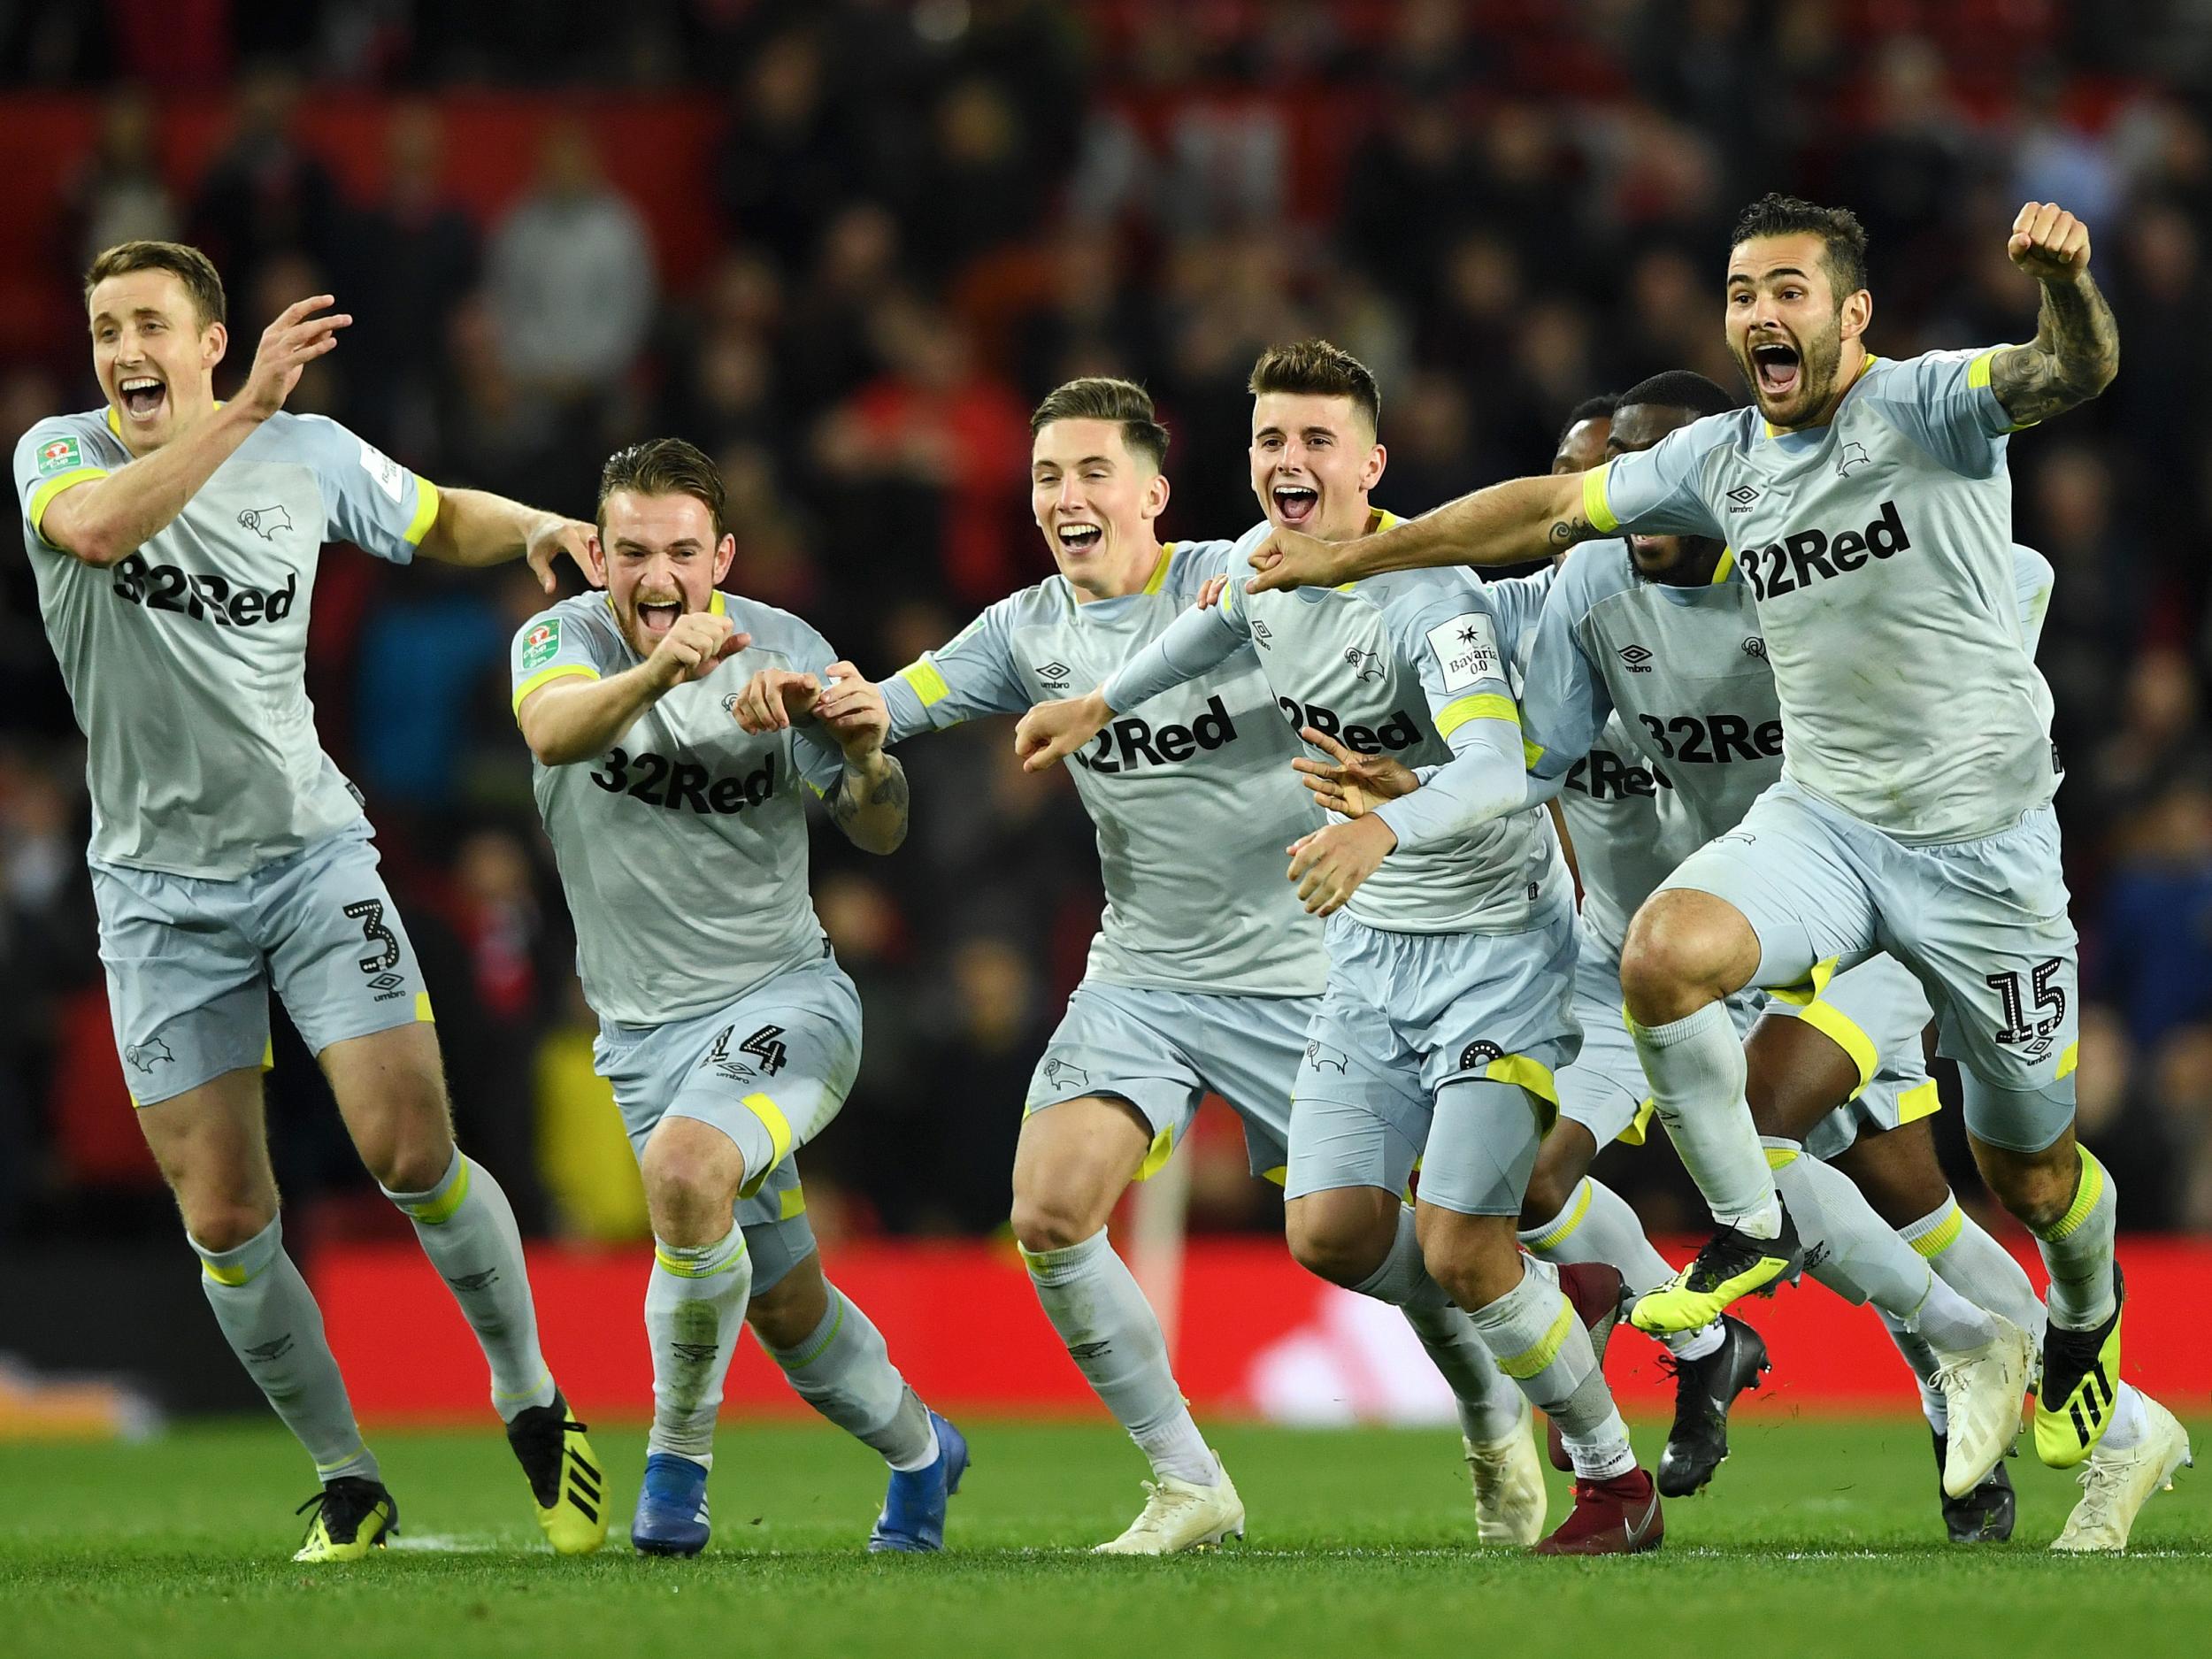 Manchester United vs Derby County as it happened – Frank Lampard's side